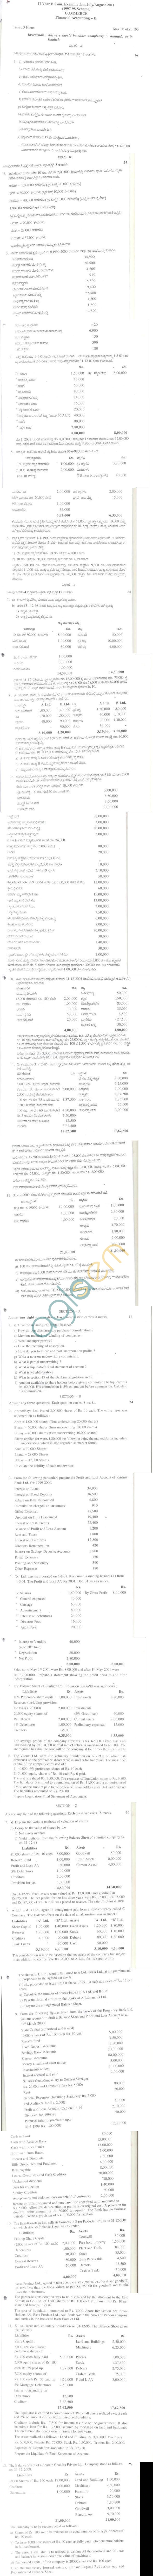 Bangalore University Question Paper July/August 2011 II Year B.Com. Examination - Commerce, Financial Accounting-II